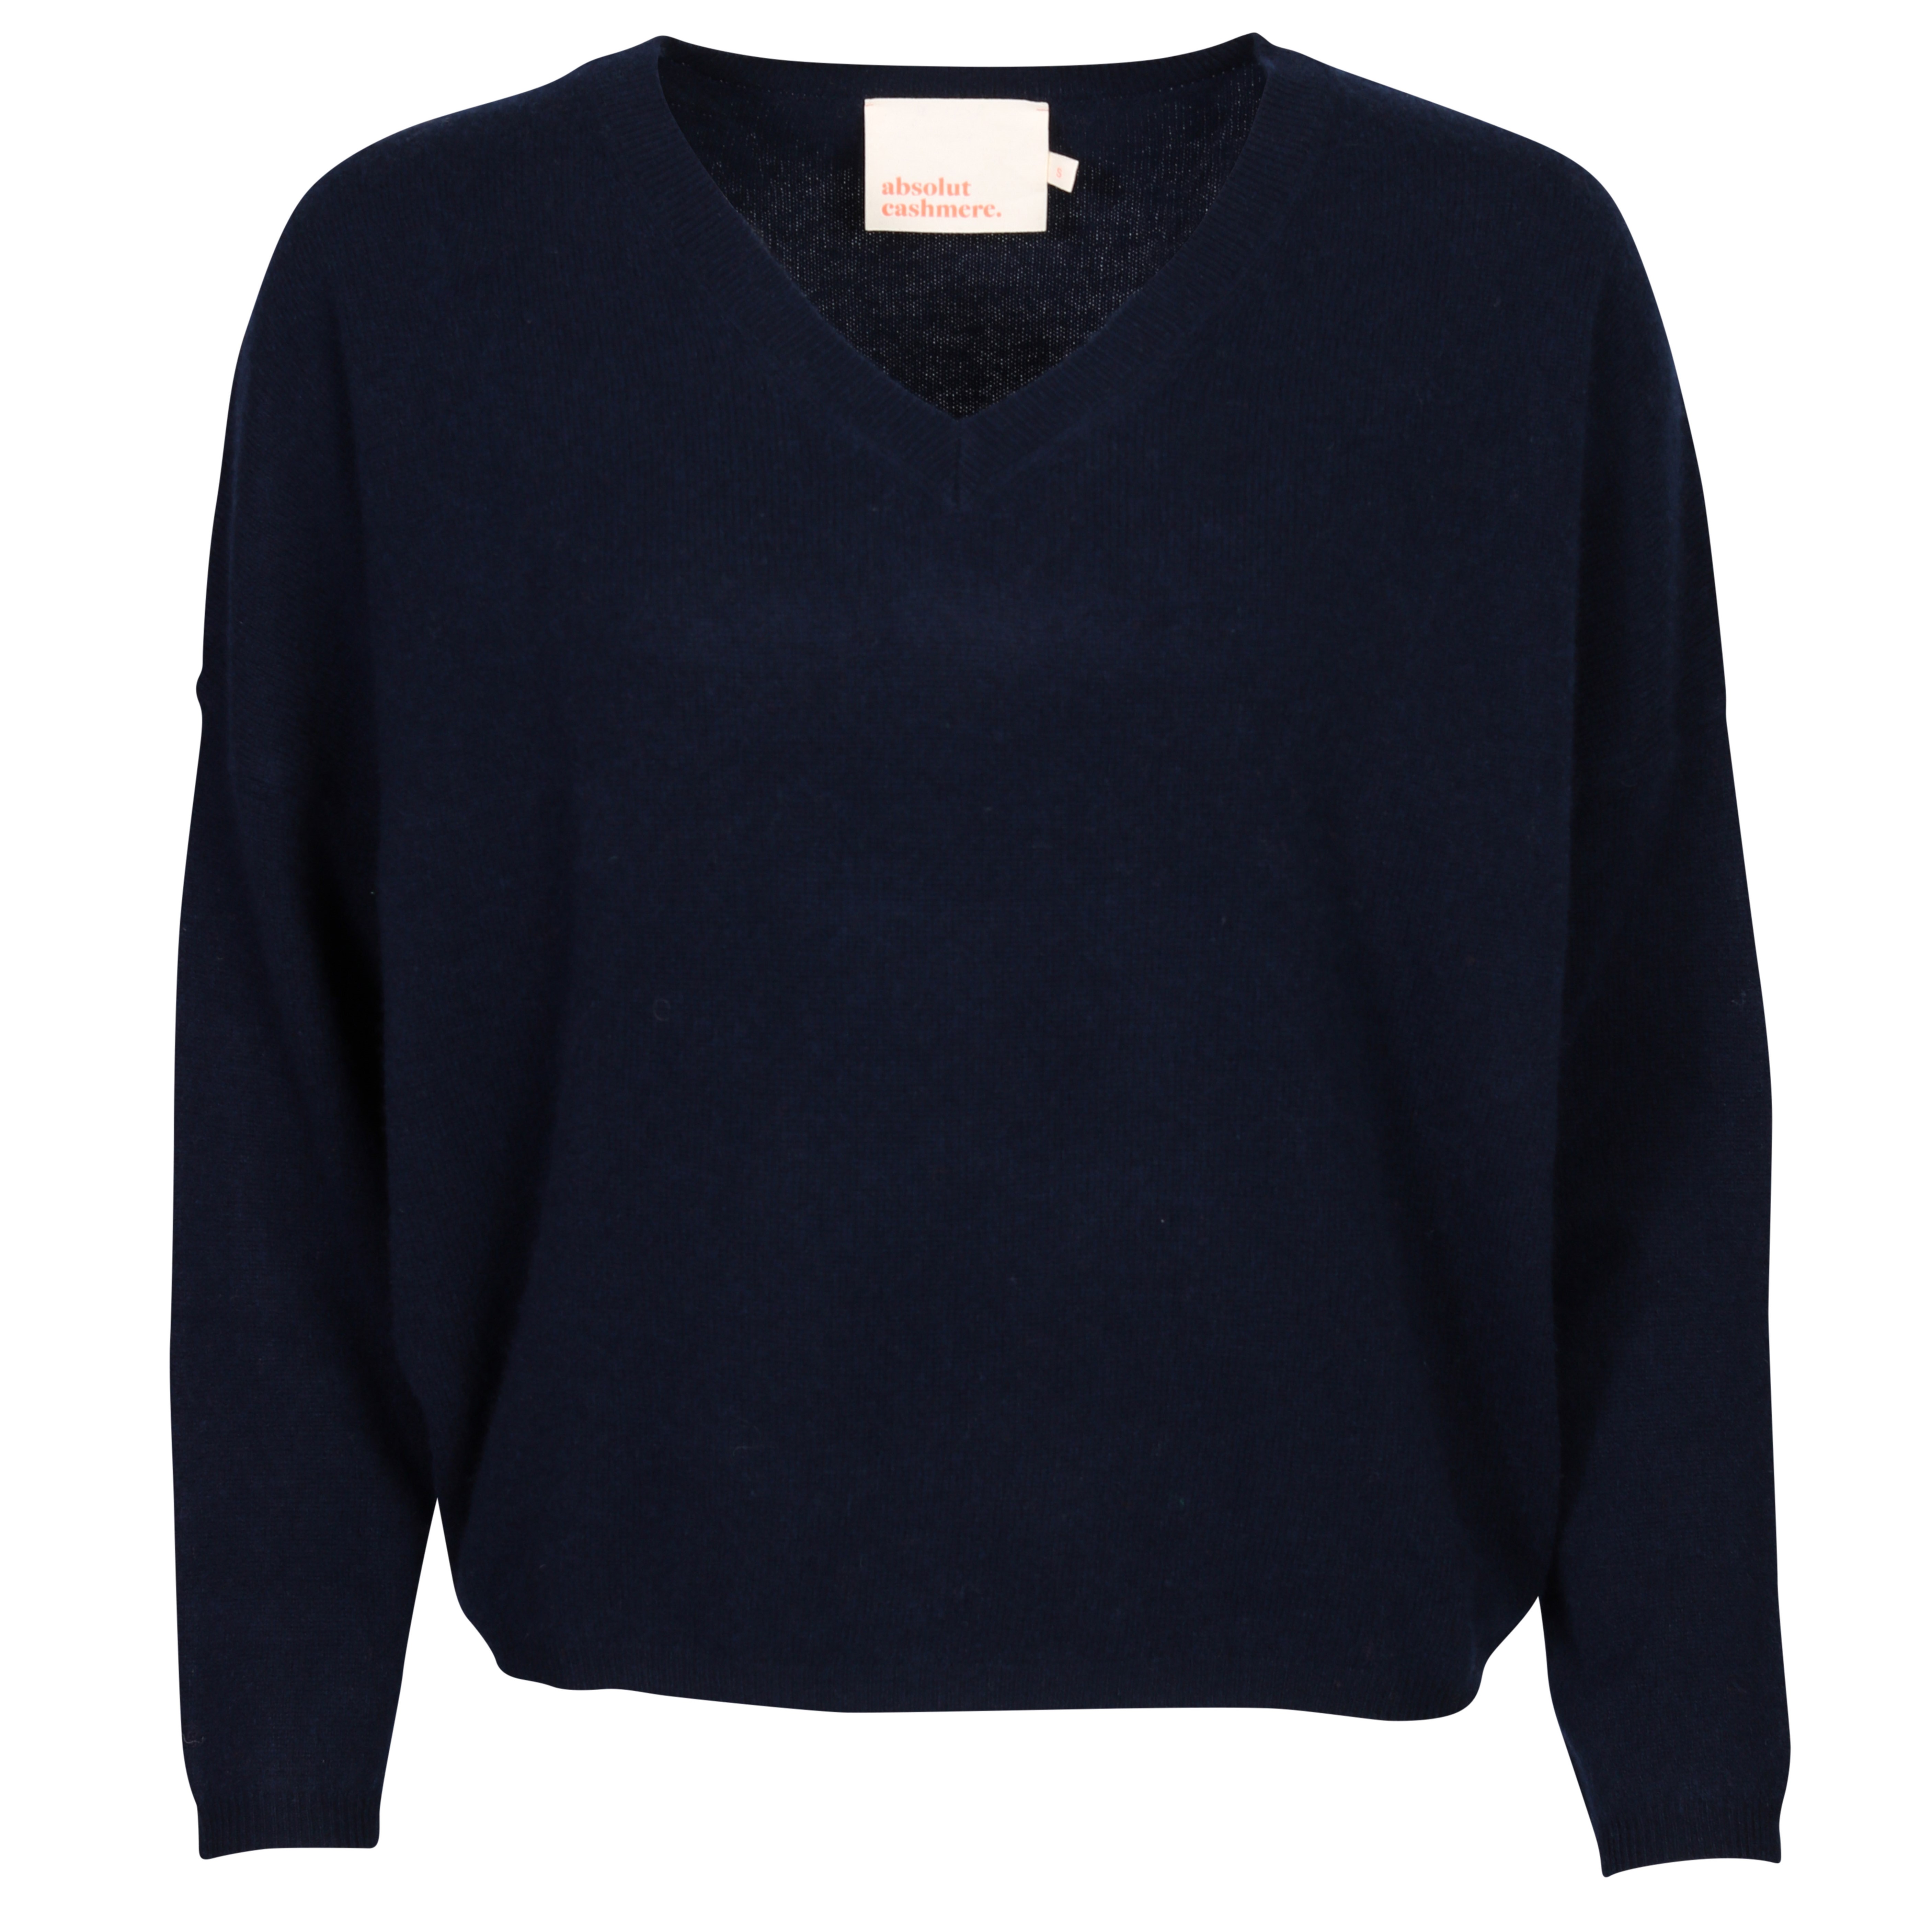 Absolut Cashmere Alicia Pullover in Nuit XS